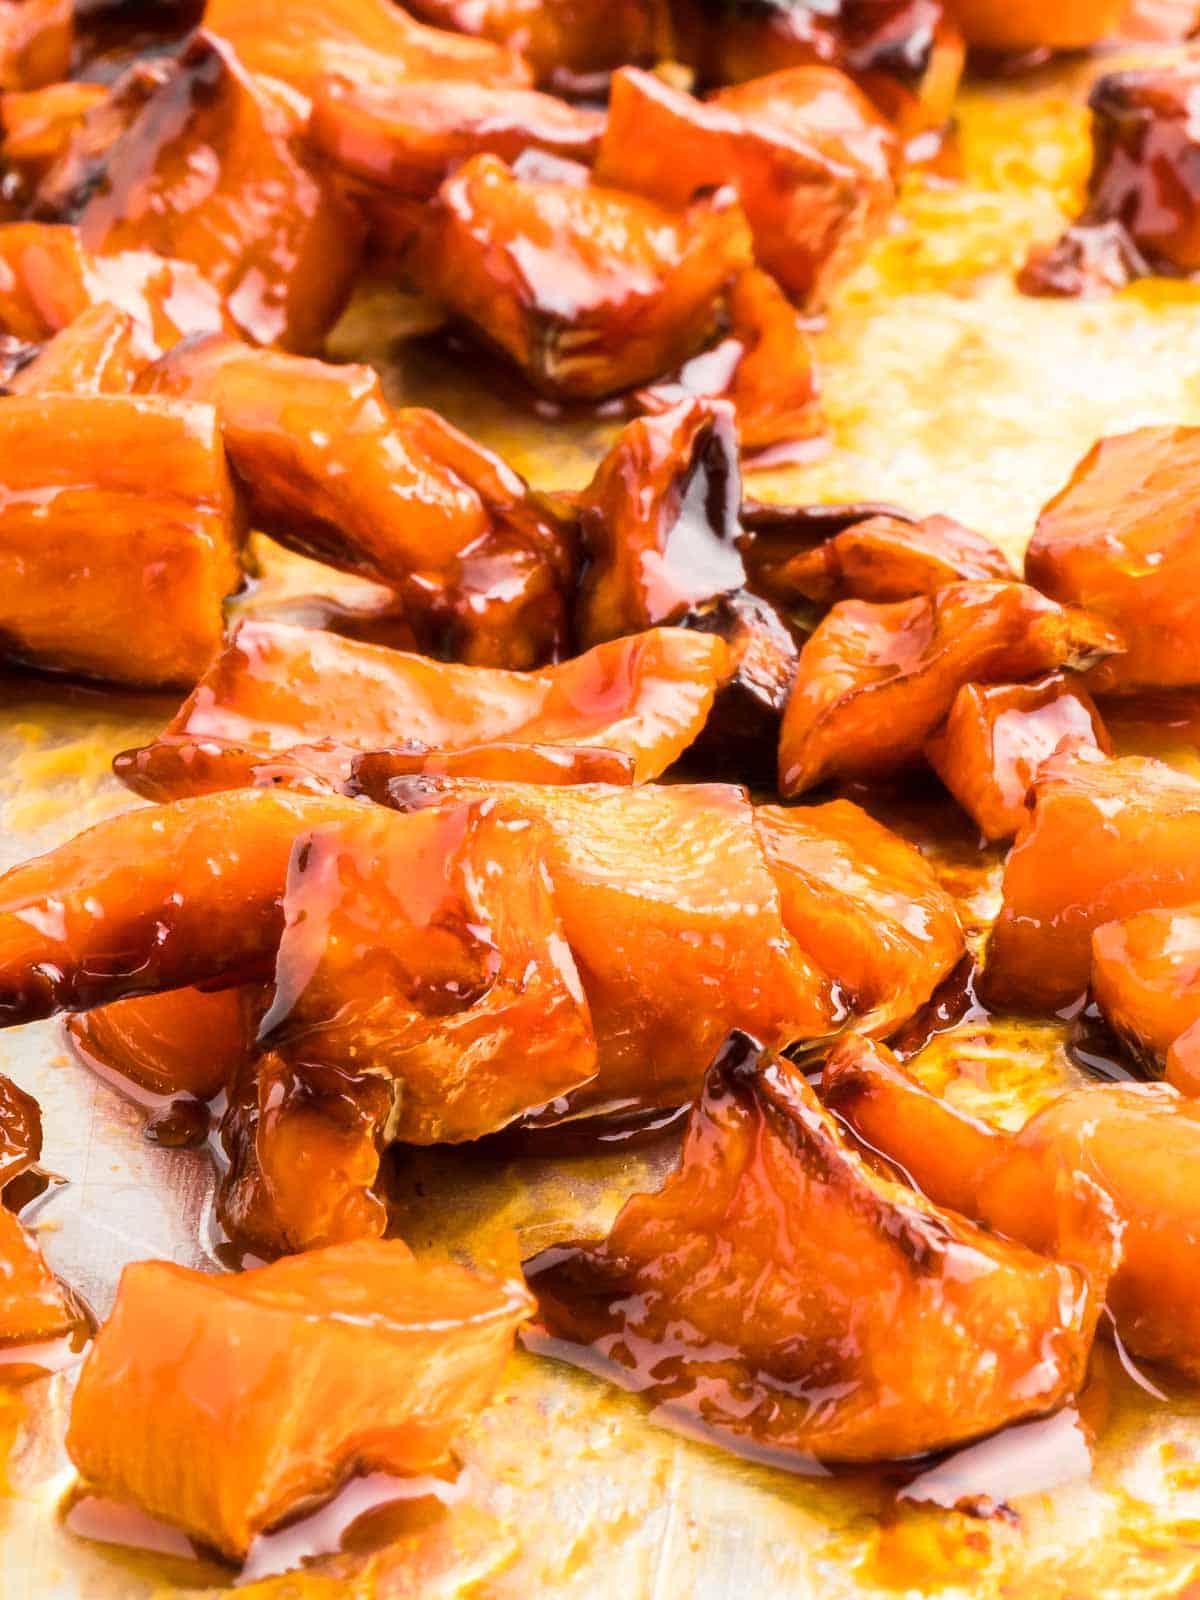 Fresh from the oven: Honey Roasted Sweet Potatoes